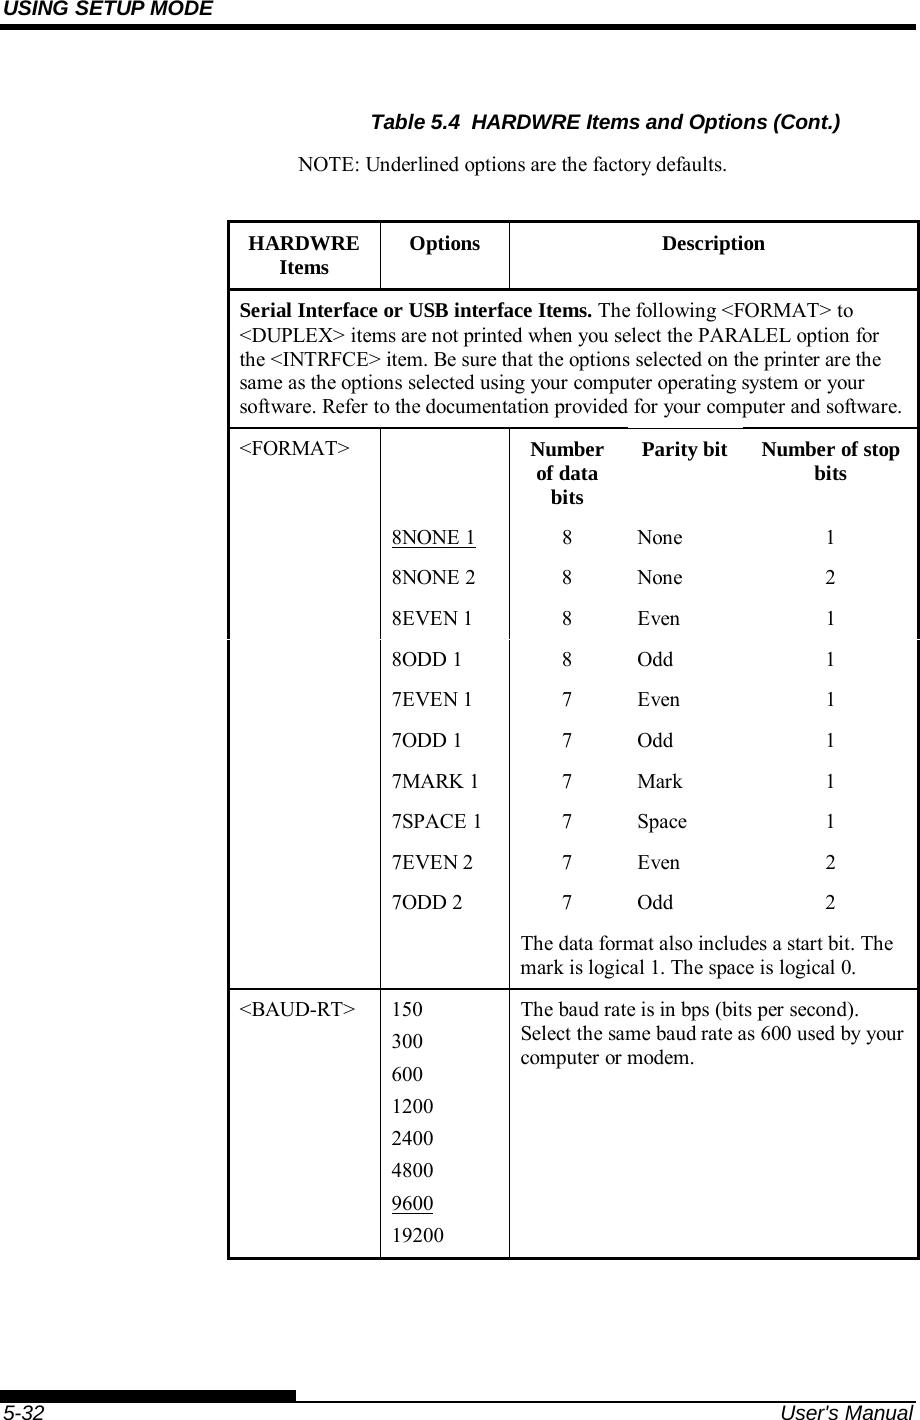 USING SETUP MODE    5-32  User&apos;s Manual Table 5.4  HARDWRE Items and Options (Cont.) NOTE: Underlined options are the factory defaults.  HARDWRE Items  Options Description Serial Interface or USB interface Items. The following &lt;FORMAT&gt; to &lt;DUPLEX&gt; items are not printed when you select the PARALEL option for the &lt;INTRFCE&gt; item. Be sure that the options selected on the printer are the same as the options selected using your computer operating system or your software. Refer to the documentation provided for your computer and software. &lt;FORMAT&gt;   Number of data bits Parity bit Number of stop bits  8NONE 1 8 None  1  8NONE 2 8 None 2  8EVEN 1 8 Even 1  8ODD 1 8 Odd 1  7EVEN 1 7 Even 1  7ODD 1 7 Odd 1  7MARK 1 7 Mark 1  7SPACE 1 7 Space 1  7EVEN 2 7 Even 2  7ODD 2 7 Odd 2     The data format also includes a start bit. The mark is logical 1. The space is logical 0. &lt;BAUD-RT&gt; 150 300 600 1200 2400 4800 9600 19200 The baud rate is in bps (bits per second). Select the same baud rate as 600 used by your computer or modem.  